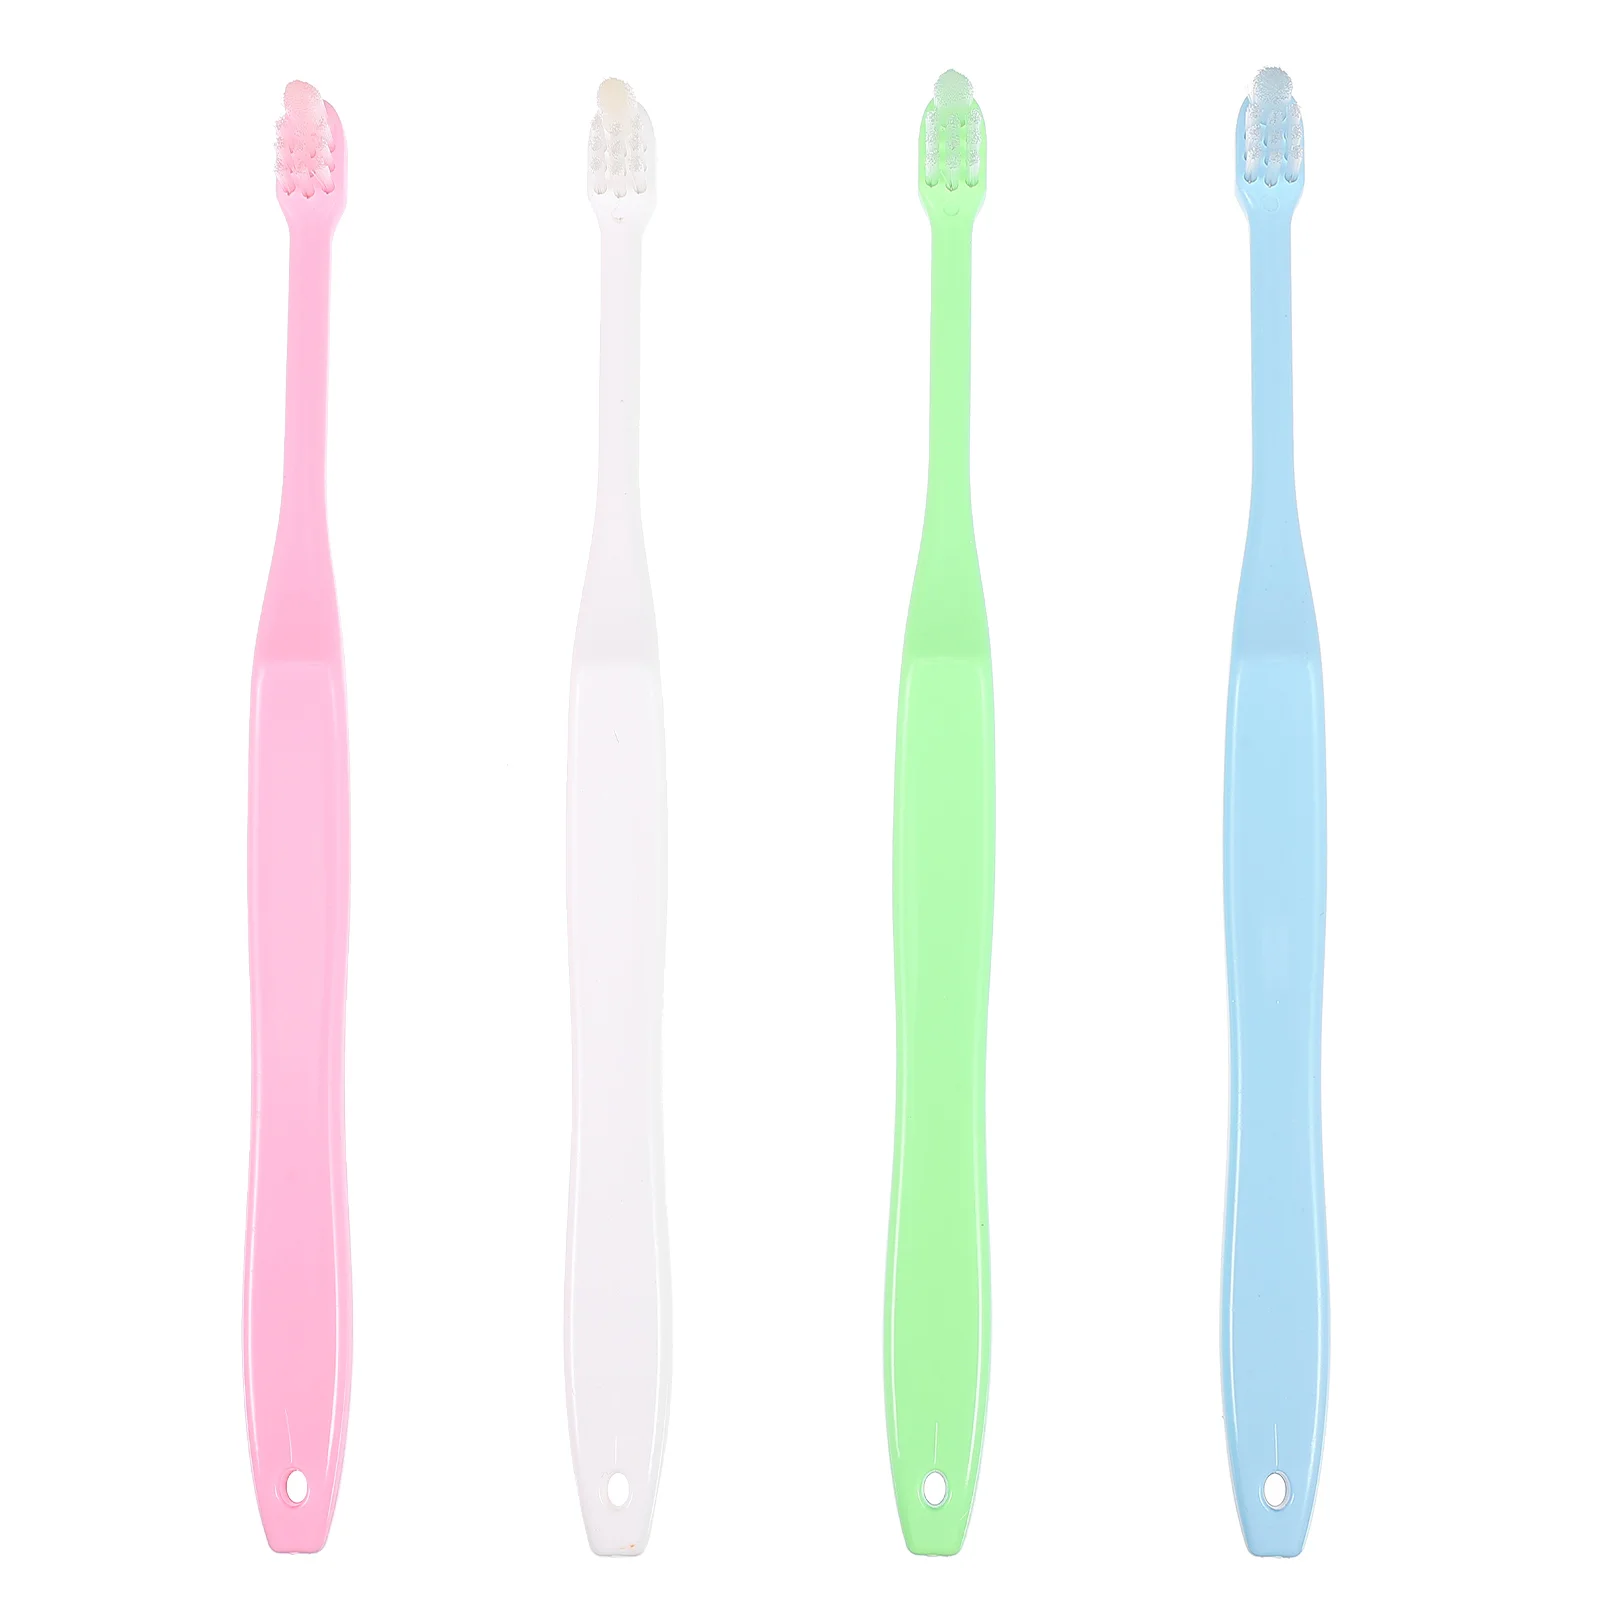 

Brush Interdental Tuft Toothbrushes Floss Braces Flossers End Soft Ortho Cleaners Picks Single Brushes Travel Shape Adults